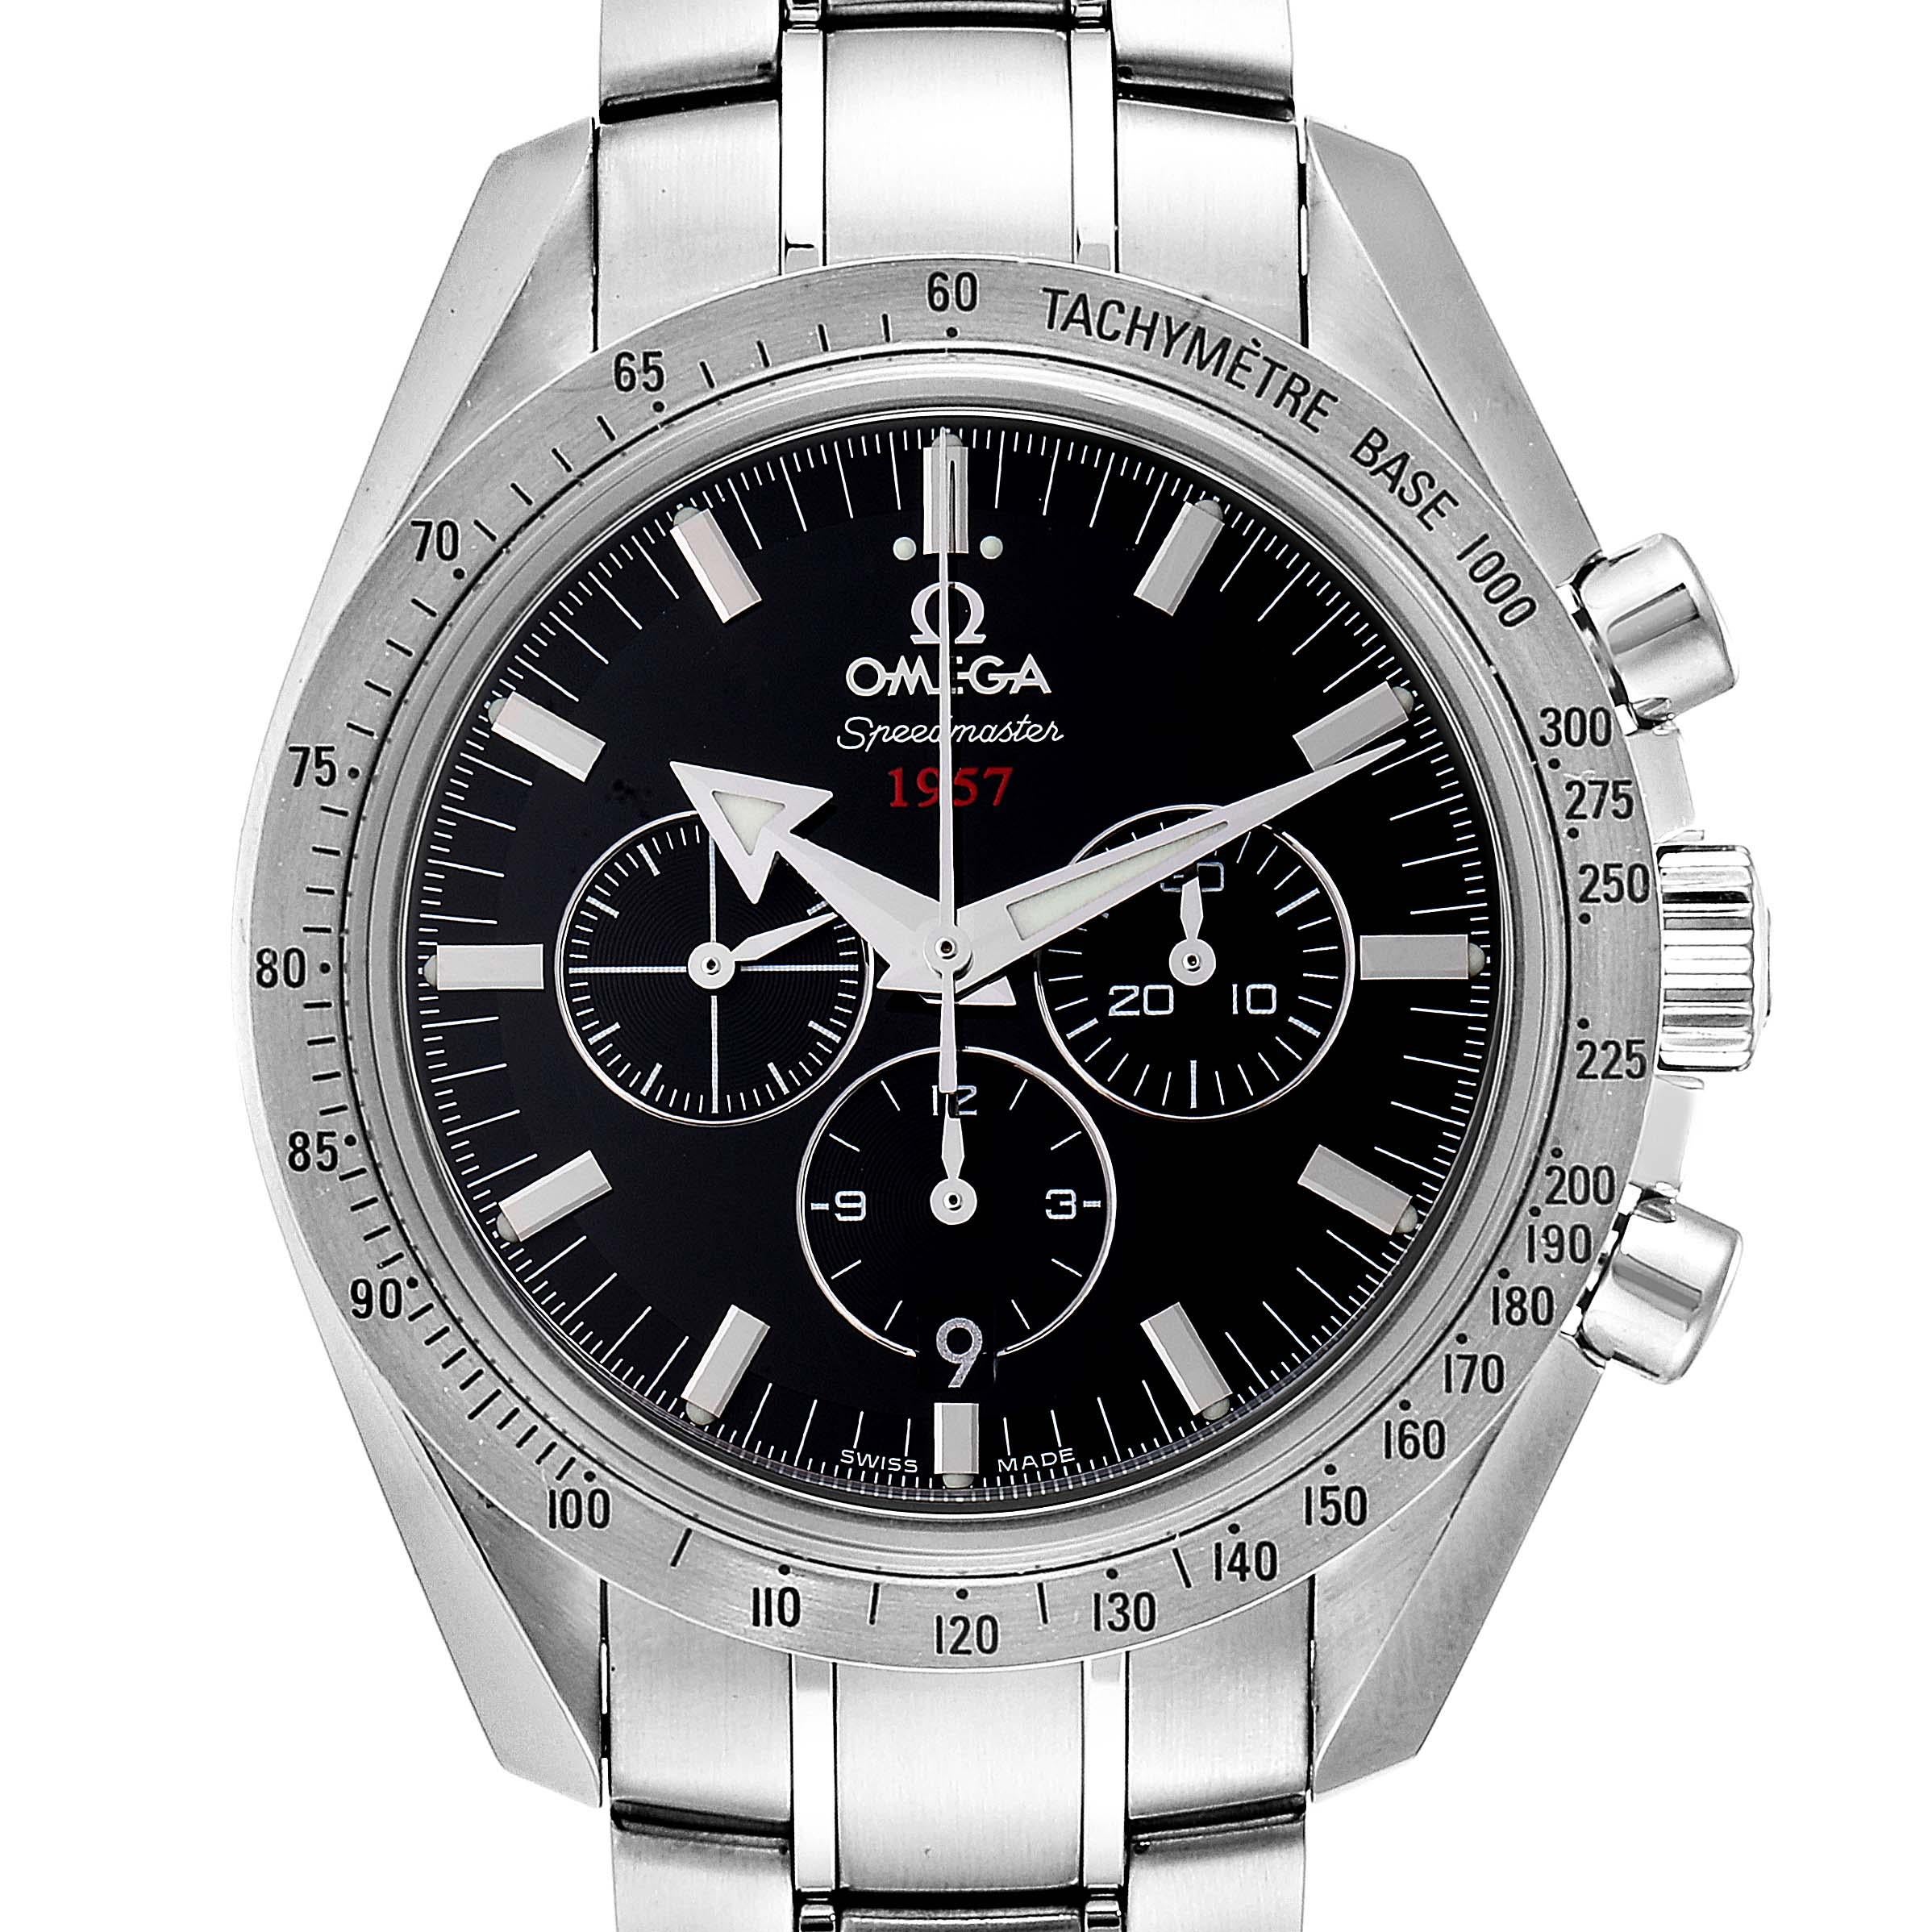 Omega Speedmaster Broad Arrow 1957 Watch 321.10.42.50.01.001 Box Card. Automatic self-winding chronograph movement with column wheel mechanism and Co-Axial Escapement. Stainless steel round case 42.0 mm in diameter. Stainless steel bezel with